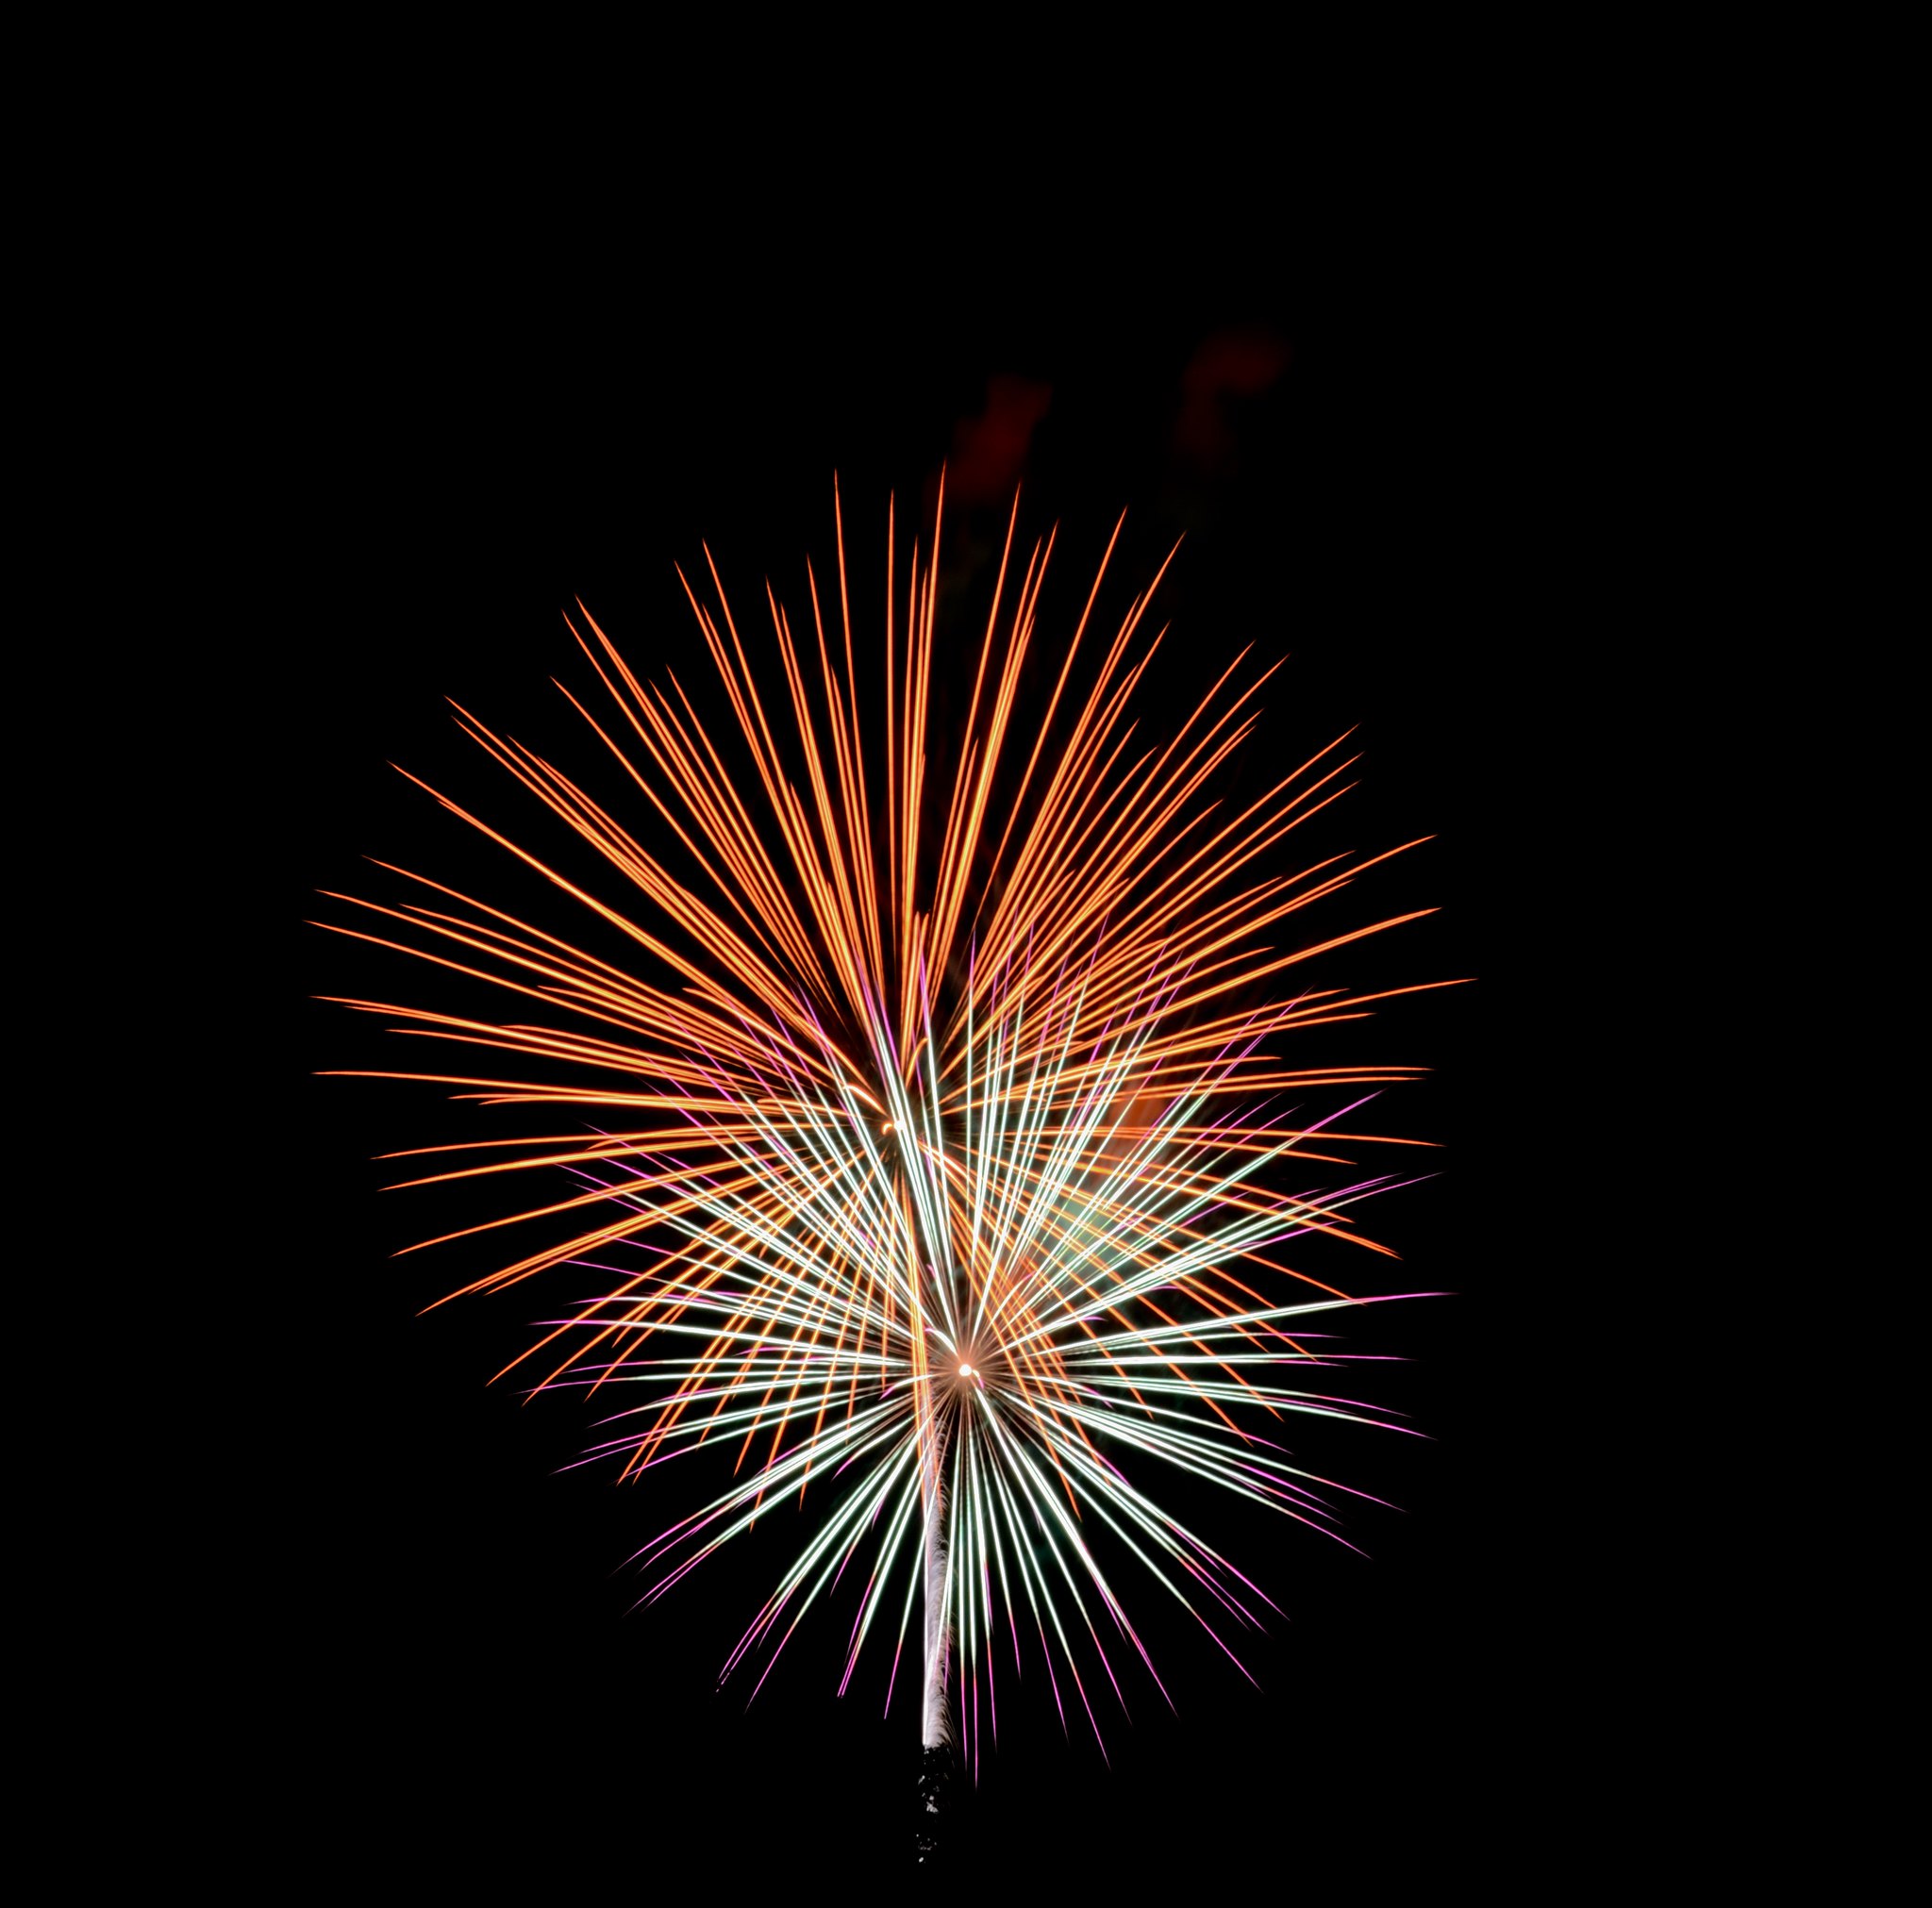 holidays, handsomely, salute, black, sparks, glow, it's beautiful iphone wallpaper